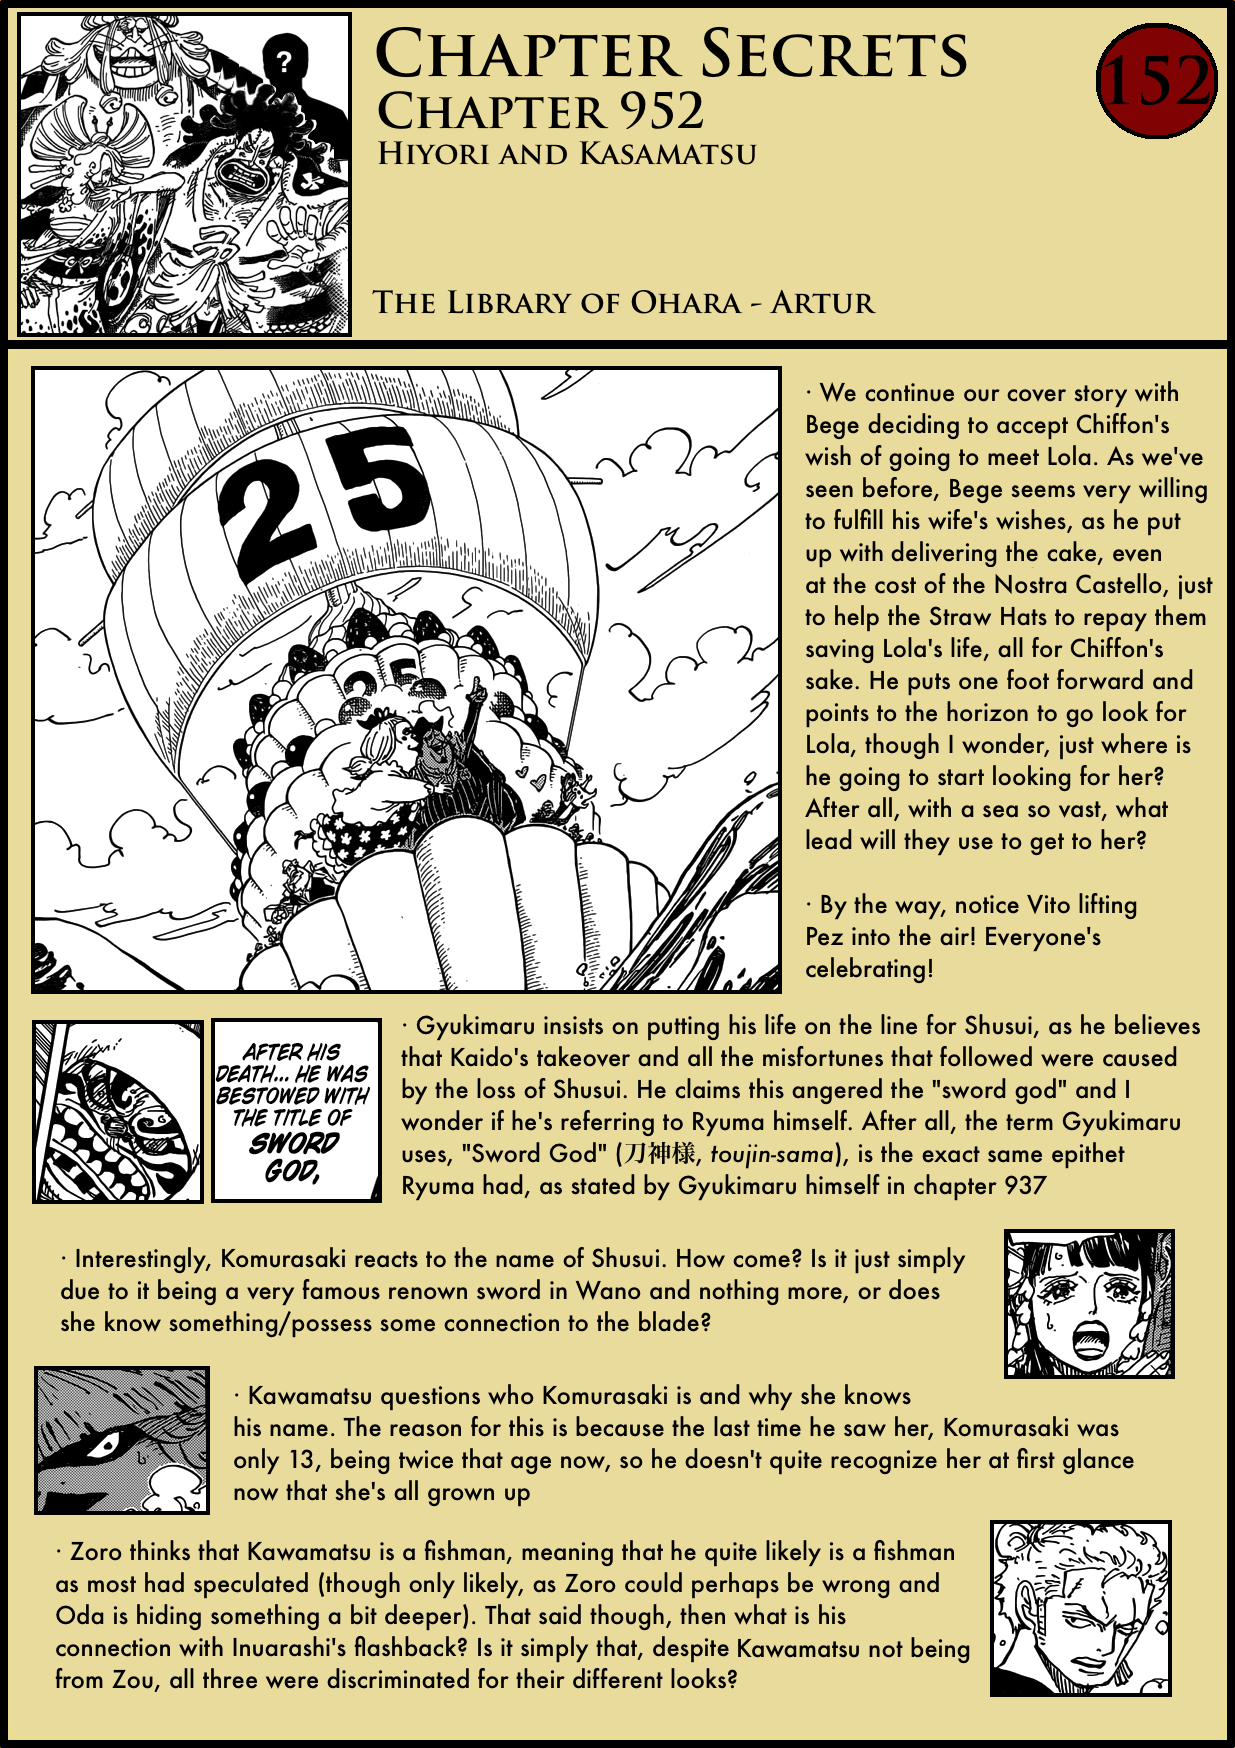 Chapter Secrets Chapter 952 In Depth Analysis The Library Of Ohara